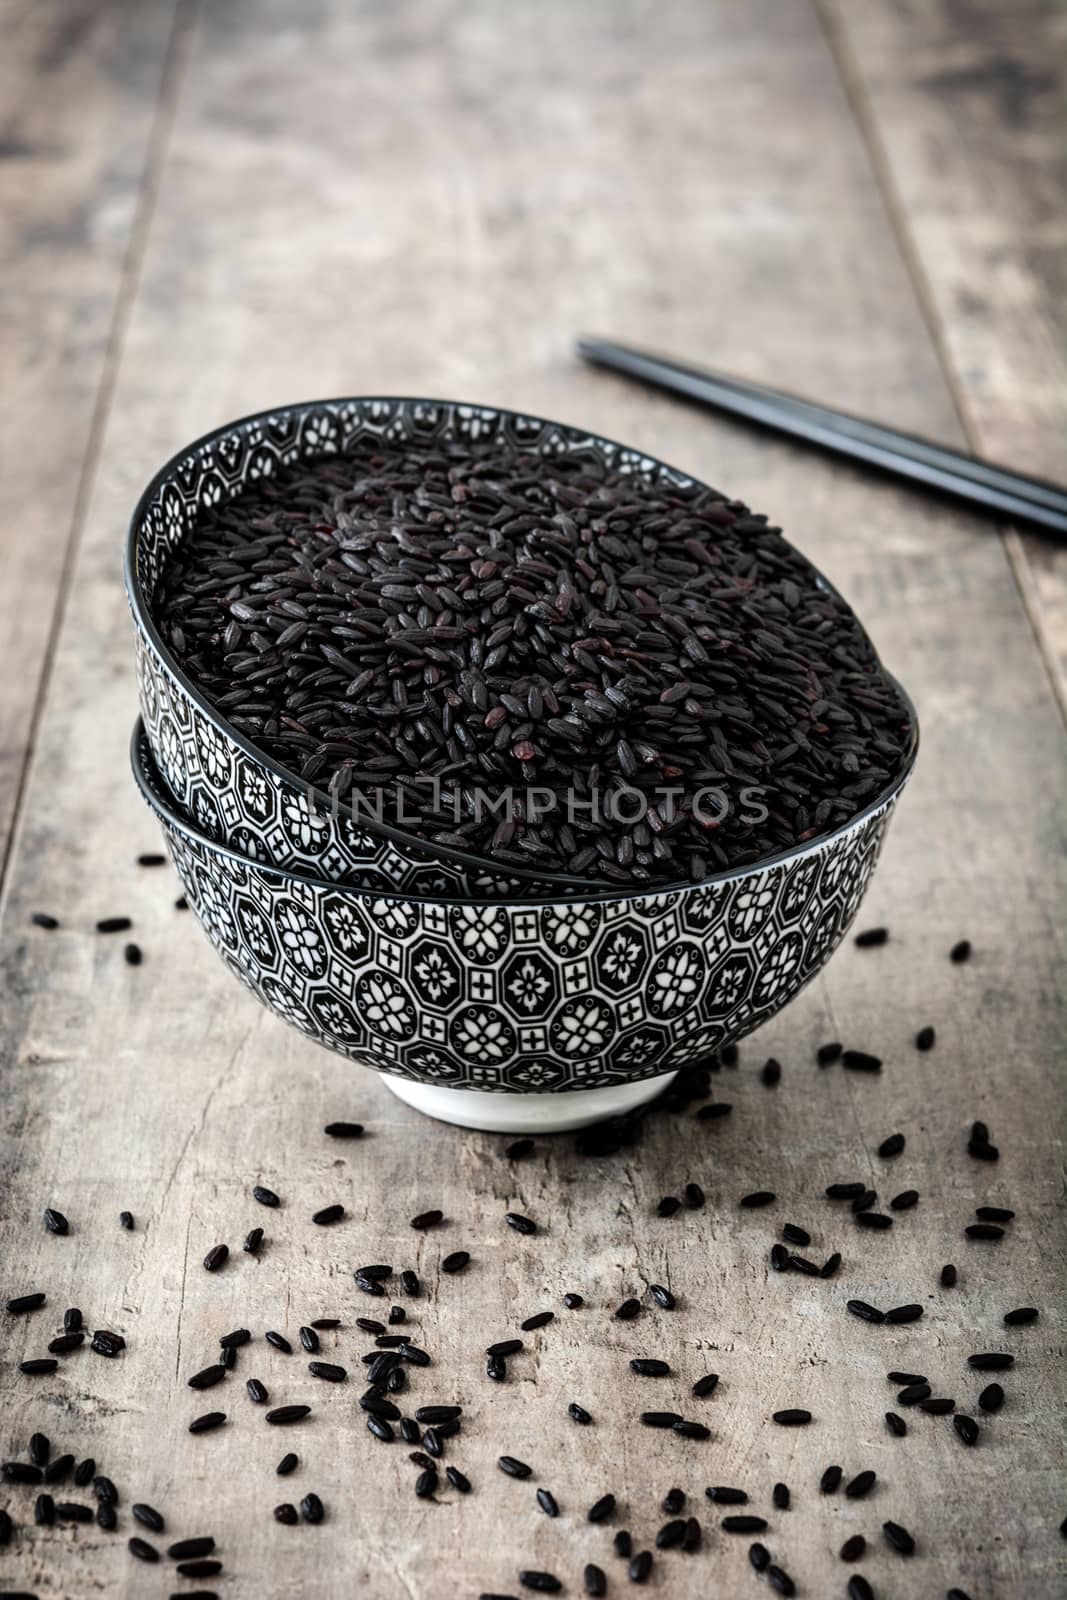 Raw black rice on wooden background by chandlervid85